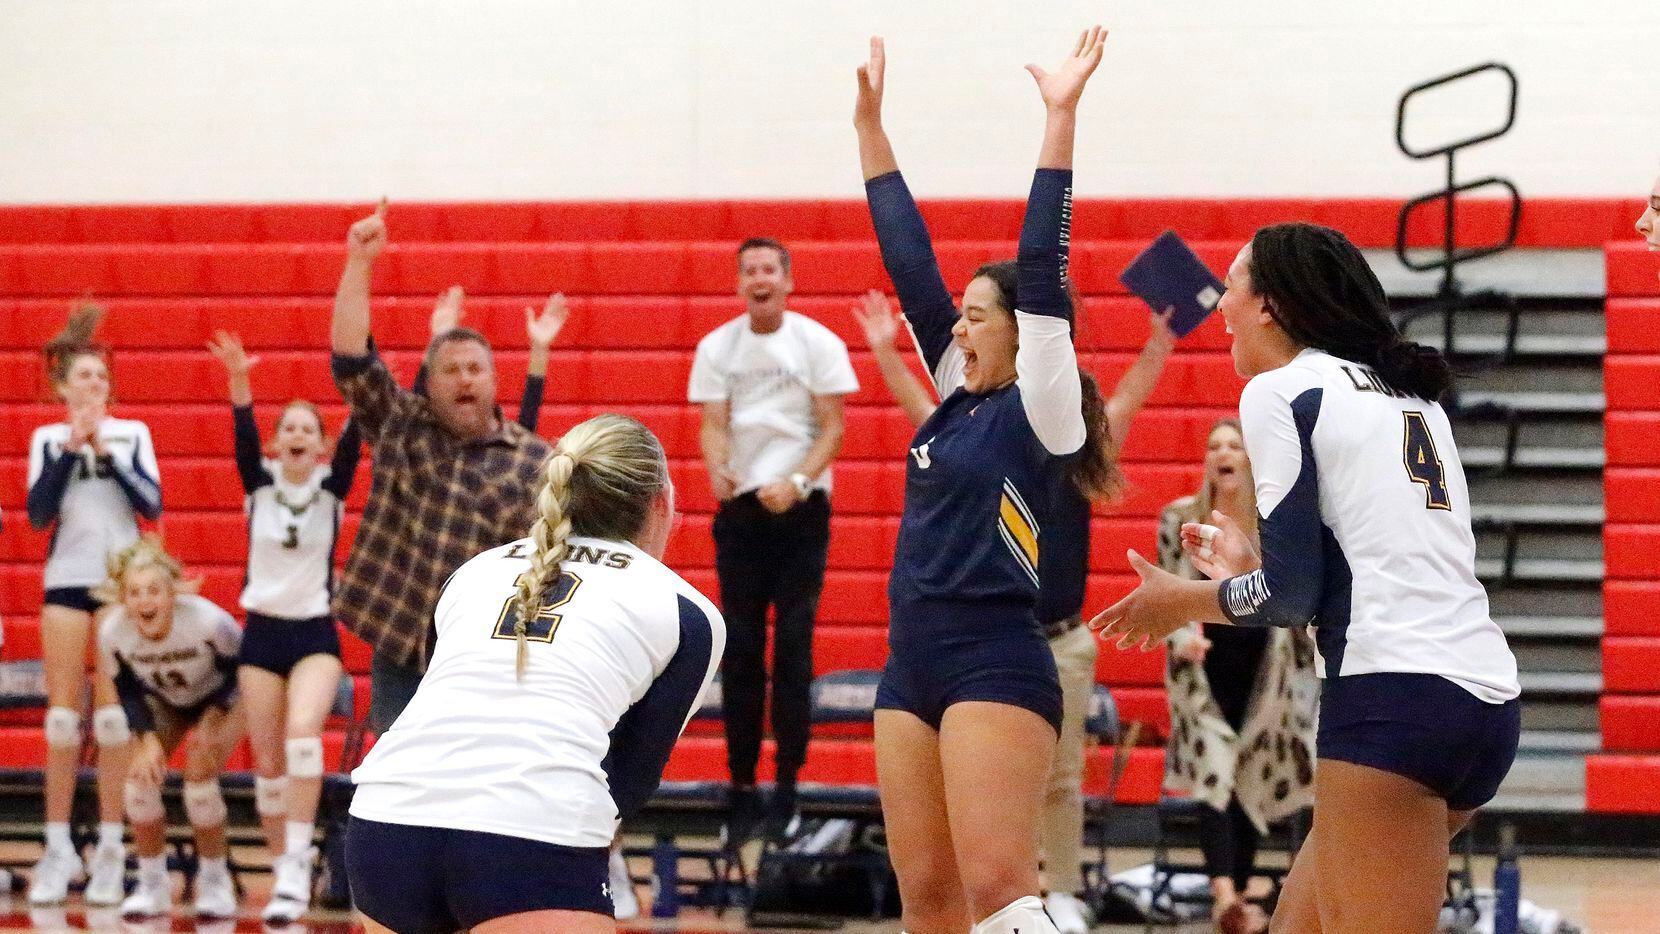 Plano Prestonwood Christian libero Gillian Pitts (8) reacts to winning the first set during Tuesday's three-set sweep of Plano John Paul II. It was the 13th consecutive win for Prestonwood. (Stewart F. House/Special Contributor)